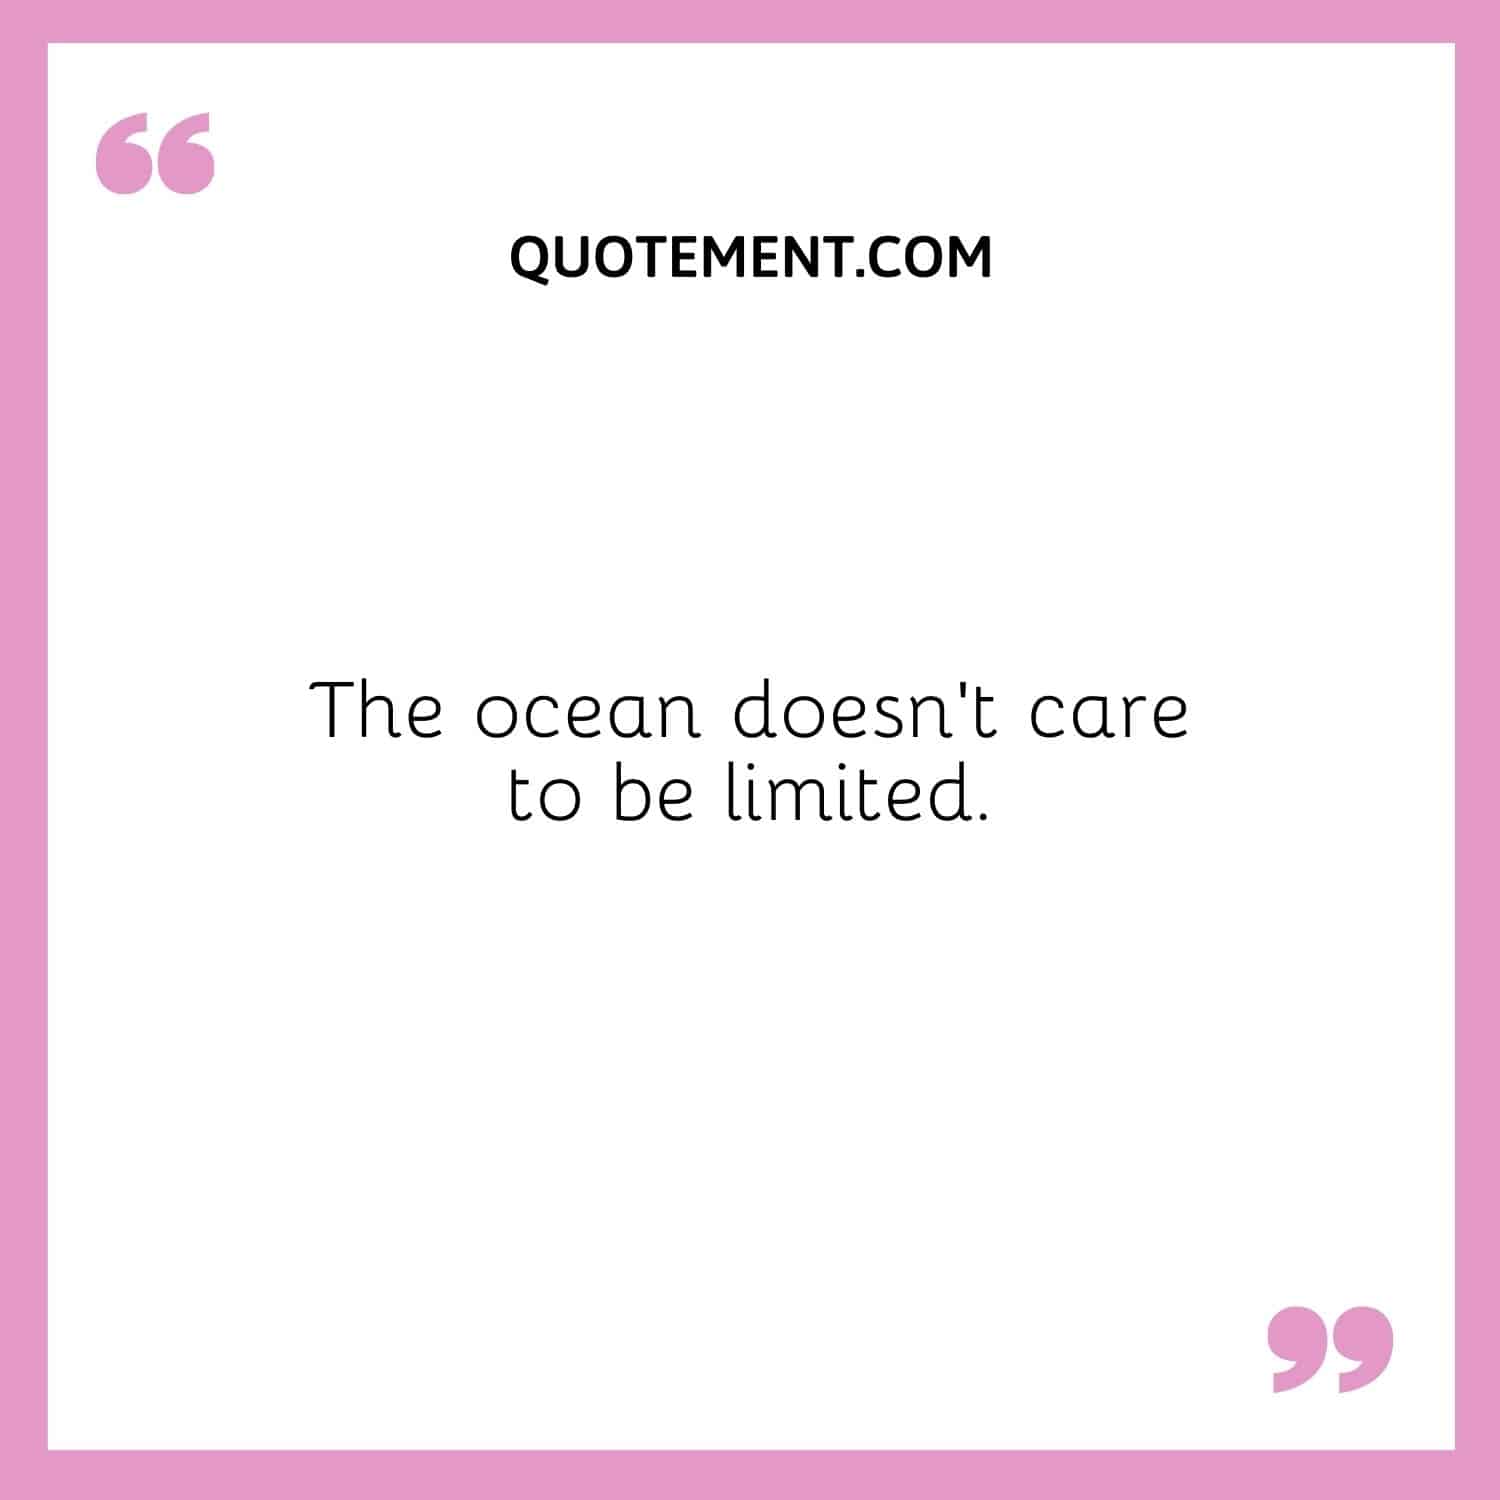 The ocean doesn’t care to be limited.